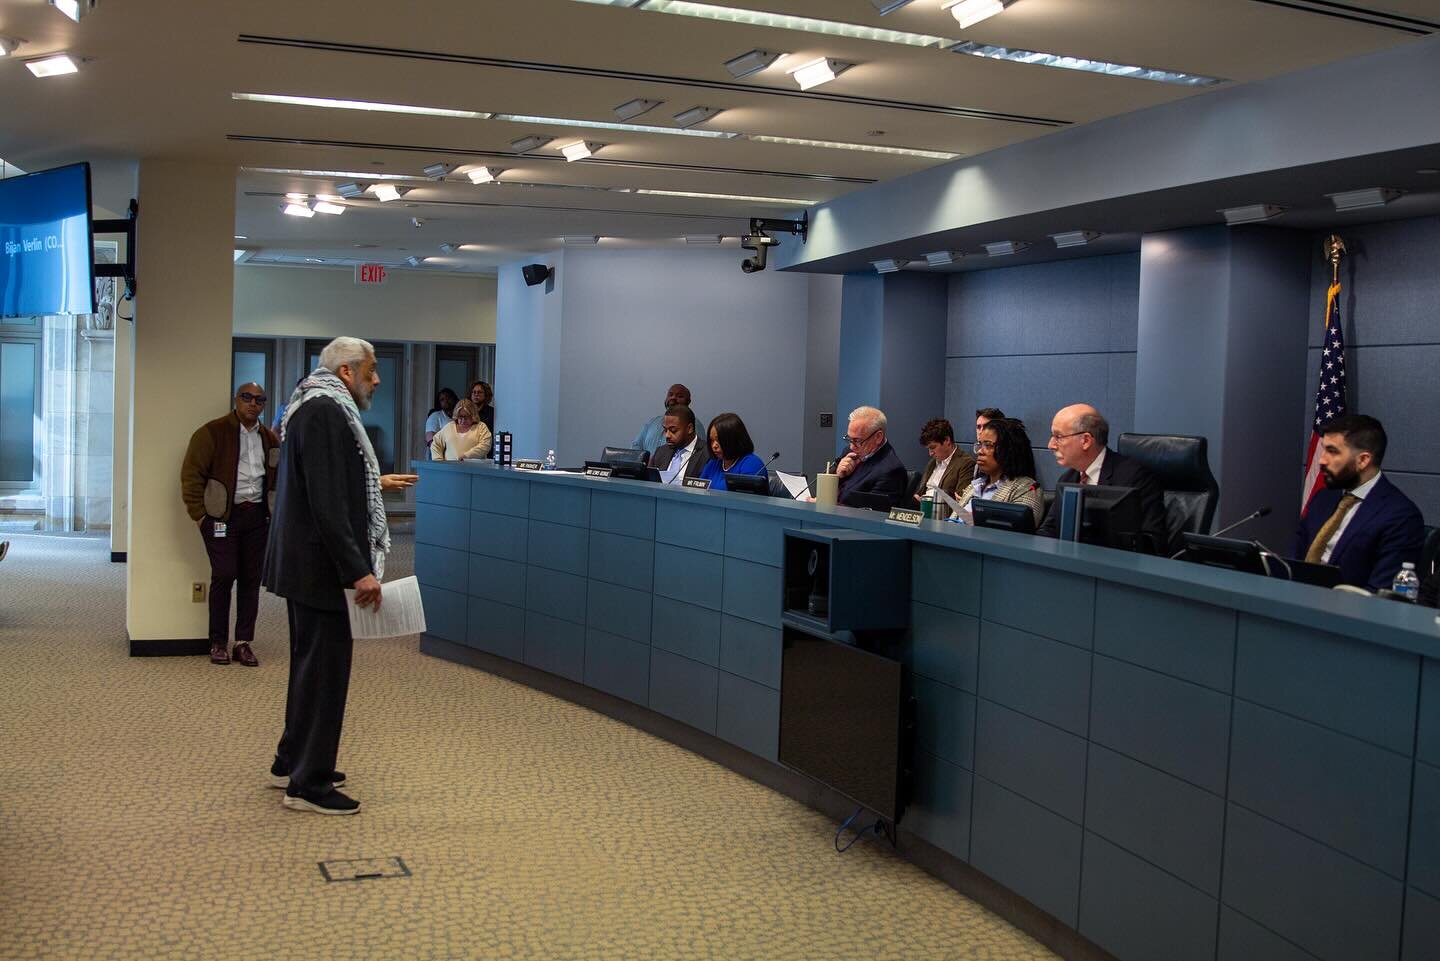 This morning, DC Residents interrupted the City Council this morning to confront council members about why they haven&rsquo;t even put a meeting together to consider calling for a ceasefire. The exchange between concerned citizens and the city counci